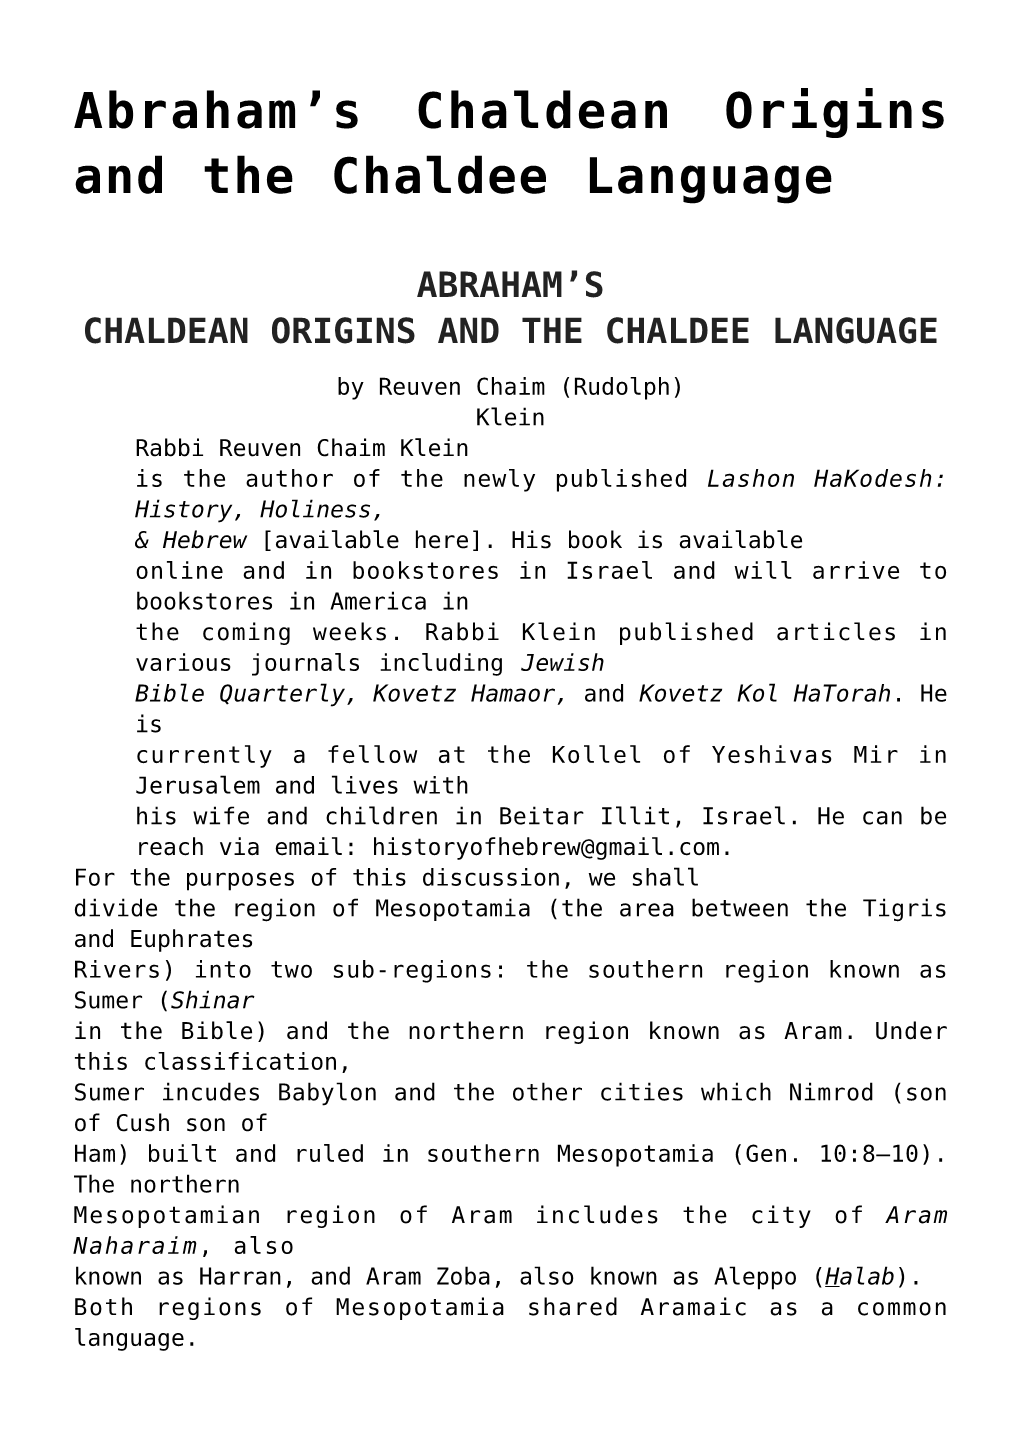 S Chaldean Origins and the Chaldee Language,How Many Children Did Michal Have?